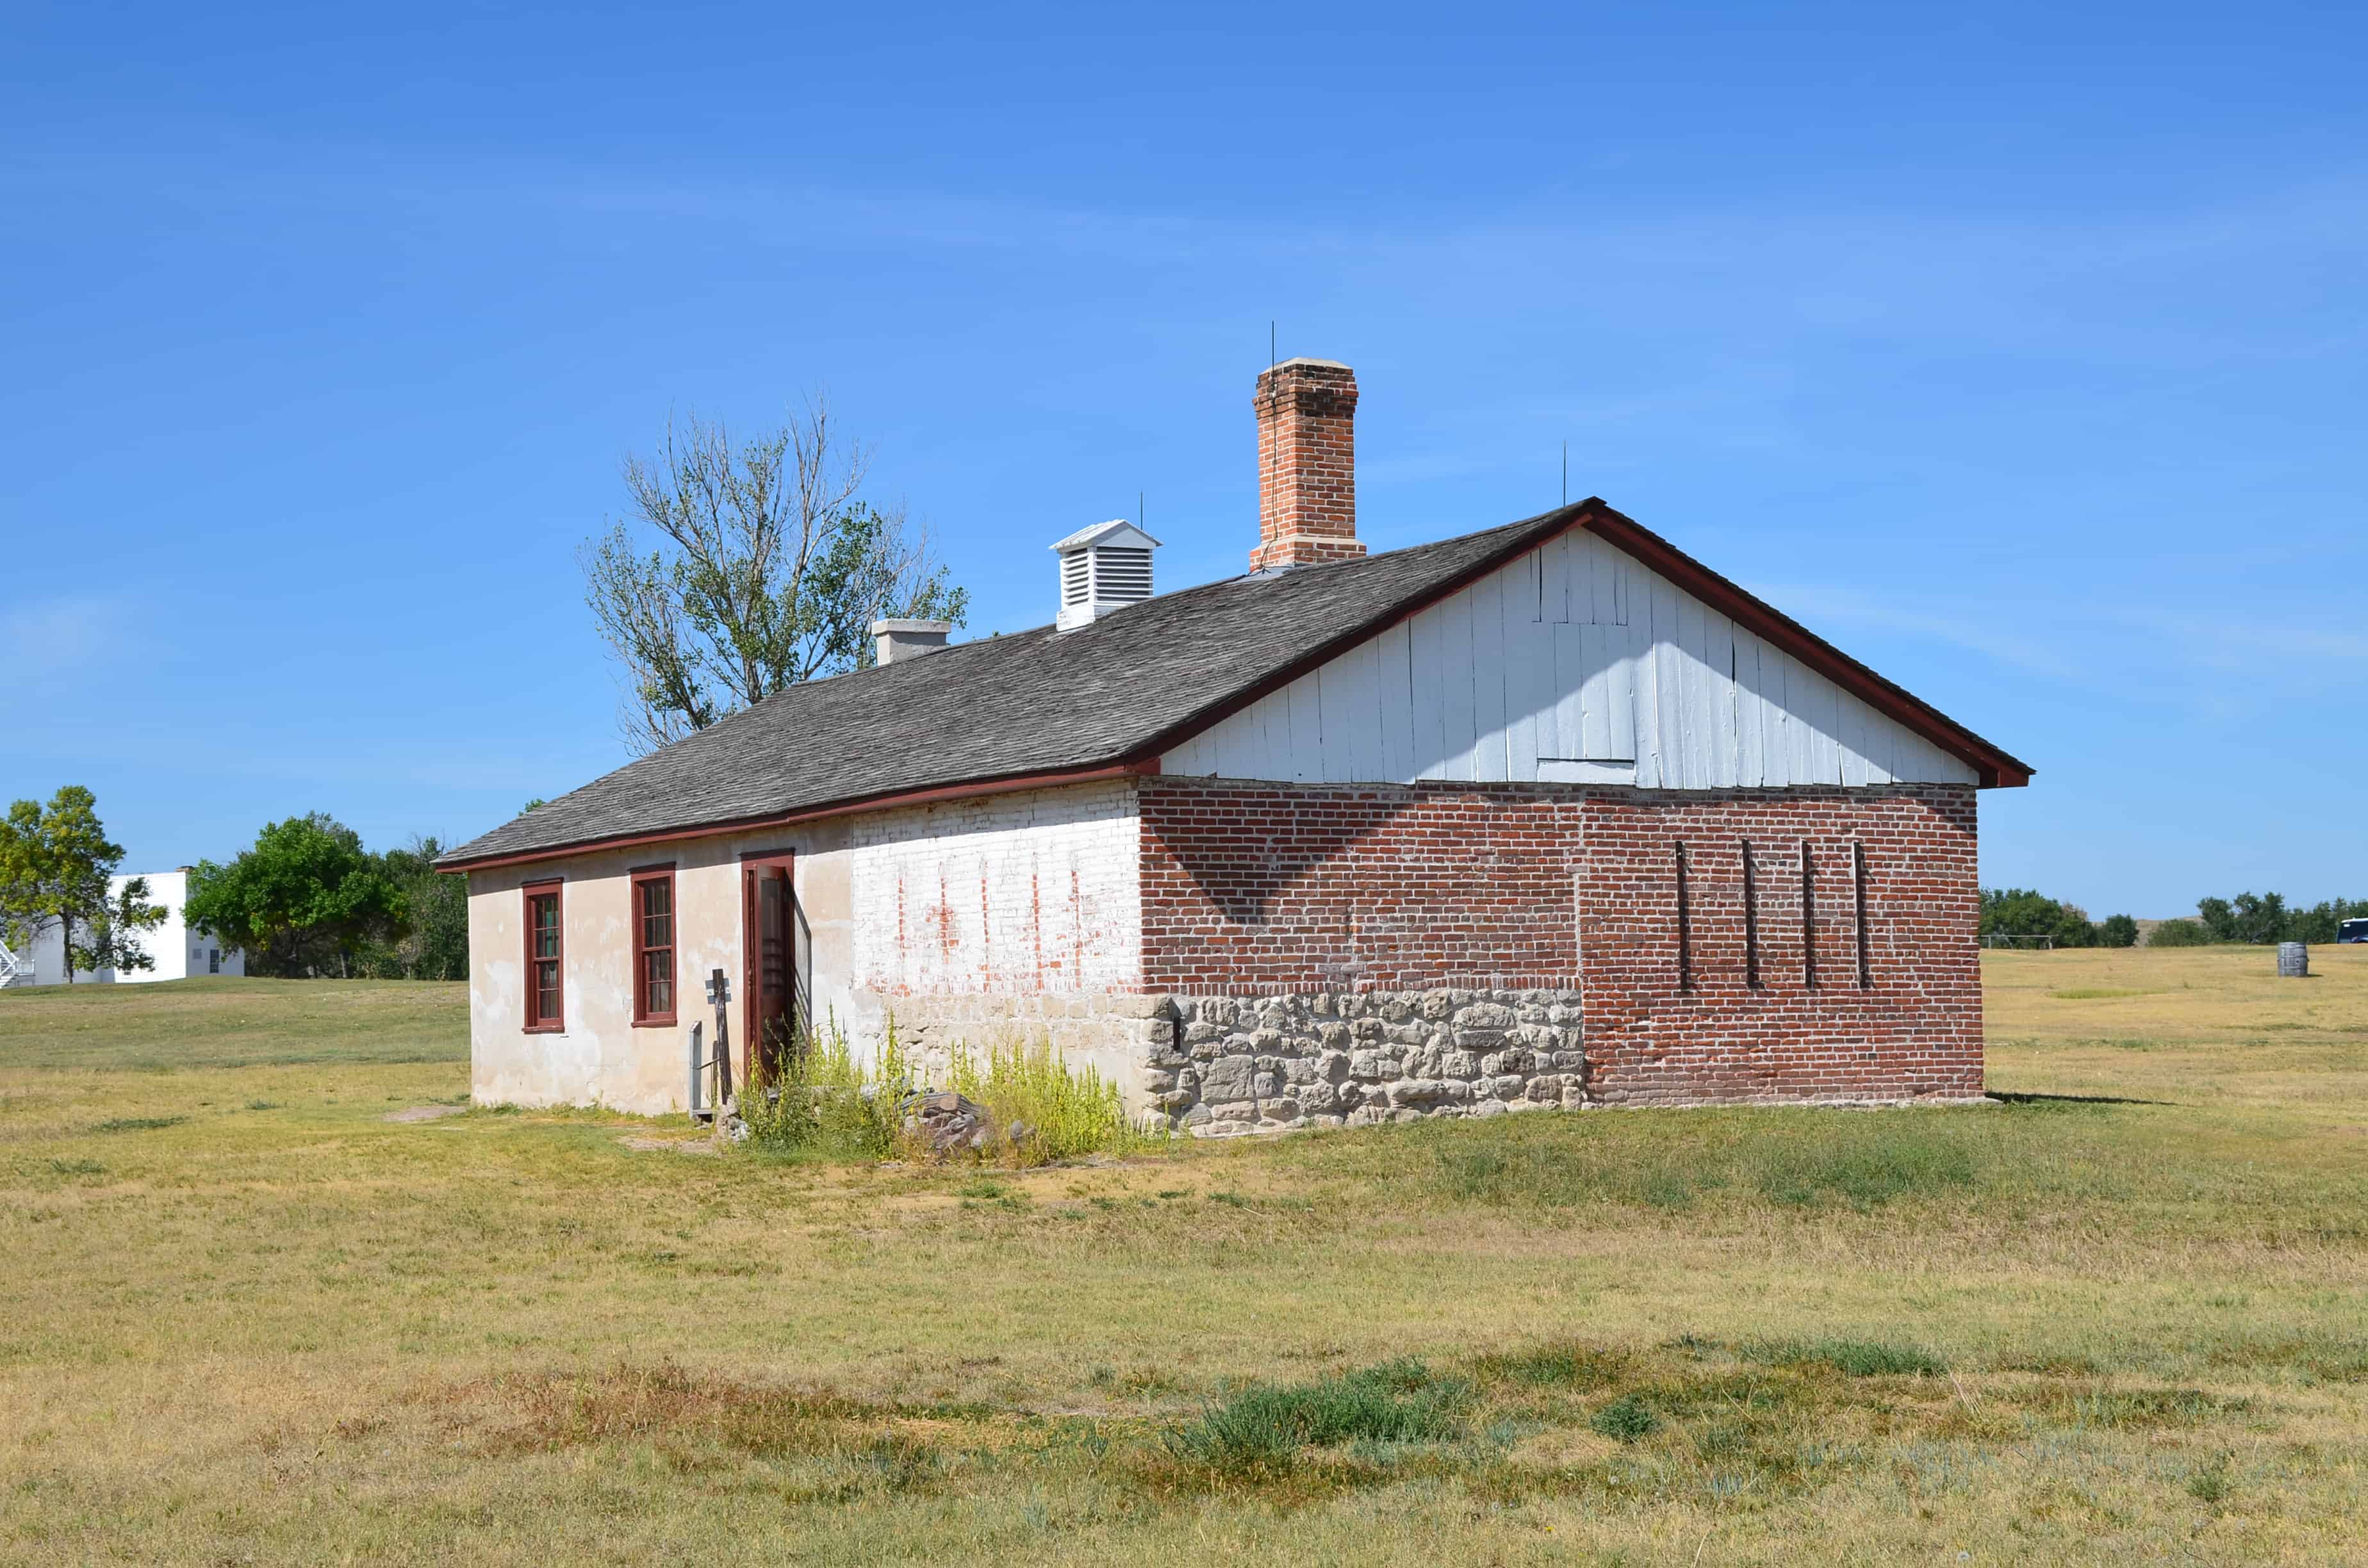 Old bakery at Fort Laramie National Historic Site in Wyoming